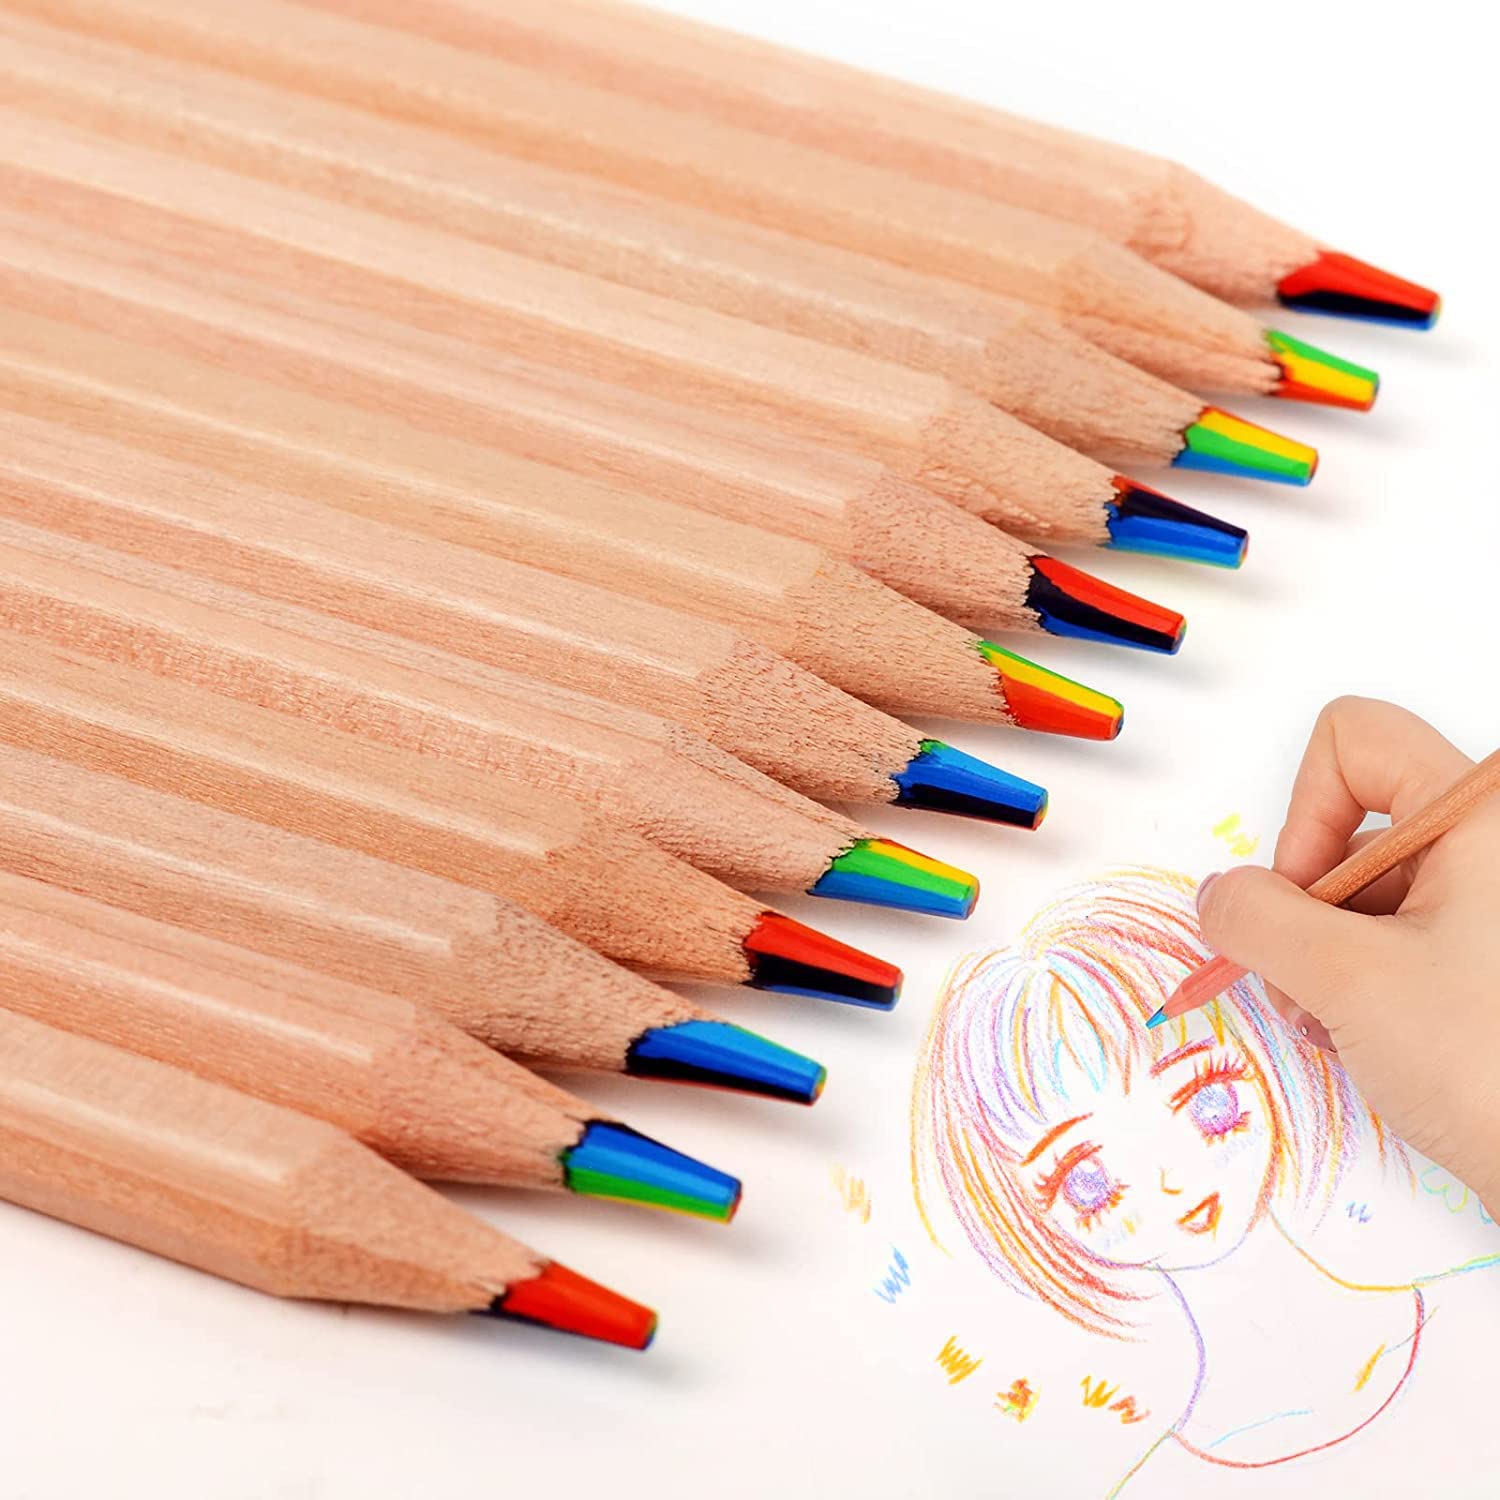 10 Pieces Rainbow Colored Pencils, 7 Color in 1 Pencils for Kids, Assorted Colors for Drawing Coloring Sketching Pencils For Drawing Stationery, Bulk, Pre-sharpened - image 5 of 7